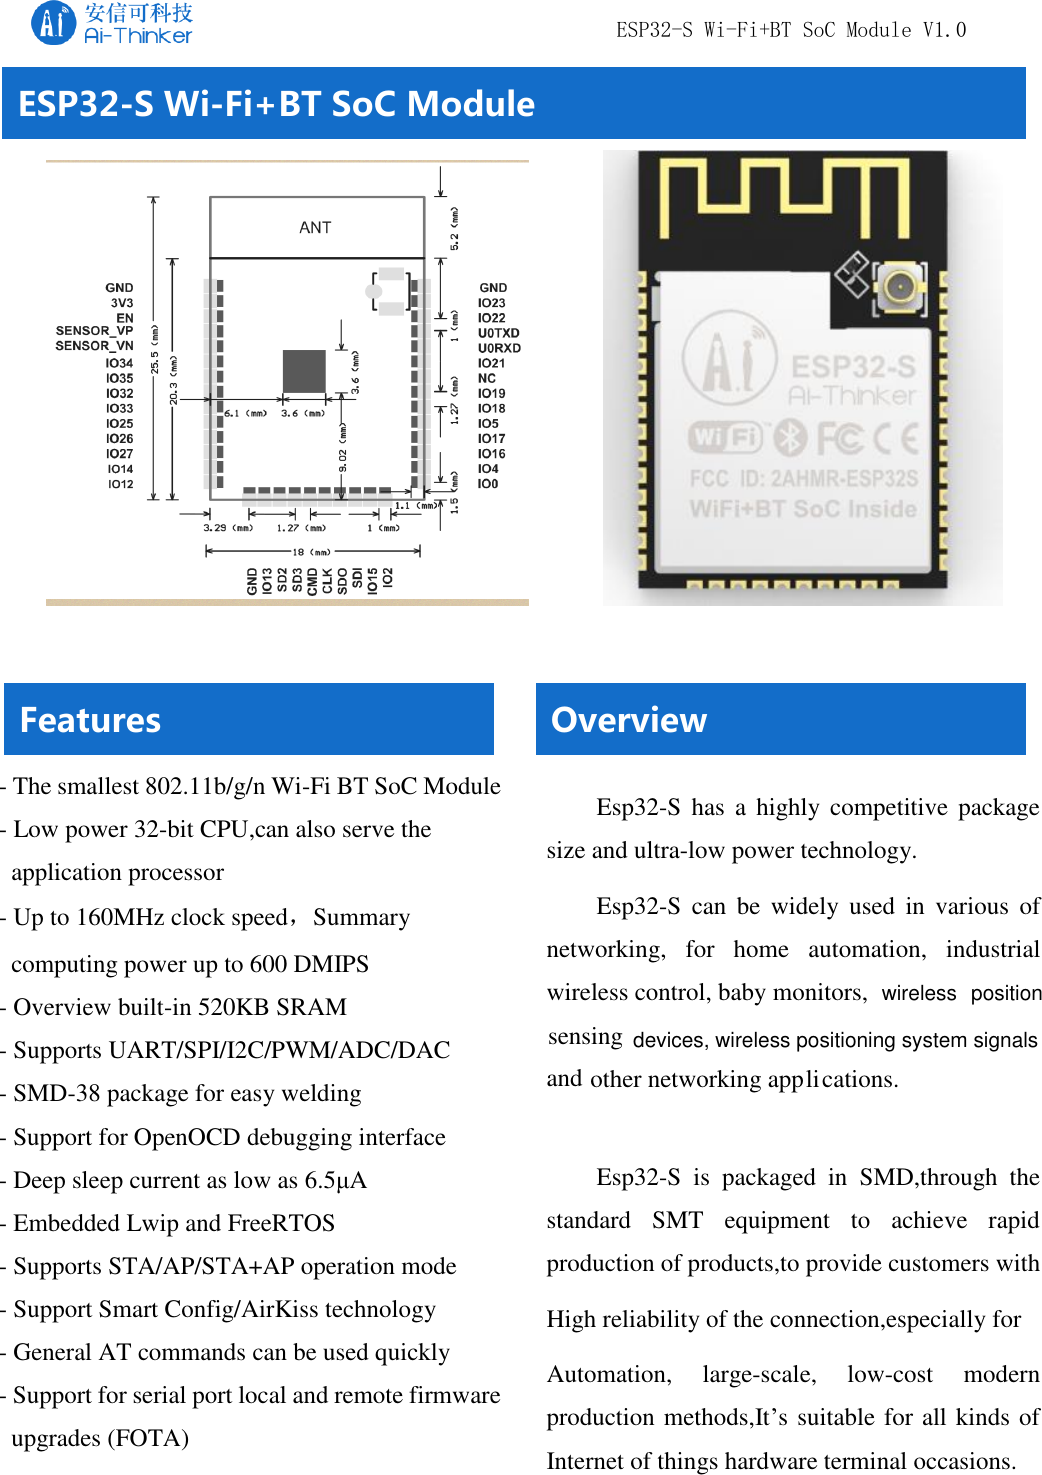    ESP32-S Wi-Fi+BT SoC Module V1.0   Copyright © 2017  Shenzhen Ai-Thinker Technology Co., Ltd All Rights Reserved                                           ESP32-S Wi-Fi+BT SoC Module Overview Esp32-S  has  a highly  competitive  package size and ultra-low power technology.  Esp32-S  can  be  widely  used  in  various  of  networking,  for  home  automation,  industrial wireless control, baby monitors,   sensing and other networking applications. Esp32-S  is  packaged  in  SMD,through  the standard  SMT  equipment  to  achieve  rapid production of products,to provide customers with High reliability of the connection,especially for Automation,  large-scale,  low-cost  modern production methods,It’s suitable for all kinds of Internet of things hardware terminal occasions.  - The smallest 802.11b/g/n Wi-Fi BT SoC Module  - Low power 32-bit CPU,can also serve the application processor - Up to 160MHz clock speed，Summary computing power up to 600 DMIPS - Overview built-in 520KB SRAM - Supports UART/SPI/I2C/PWM/ADC/DAC - SMD-38 package for easy welding - Support for OpenOCD debugging interface - Deep sleep current as low as 6.5μA - Embedded Lwip and FreeRTOS - Supports STA/AP/STA+AP operation mode - Support Smart Config/AirKiss technology - General AT commands can be used quickly - Support for serial port local and remote firmware upgrades (FOTA) Features  wireless  positiondevices, wireless positioning system signals